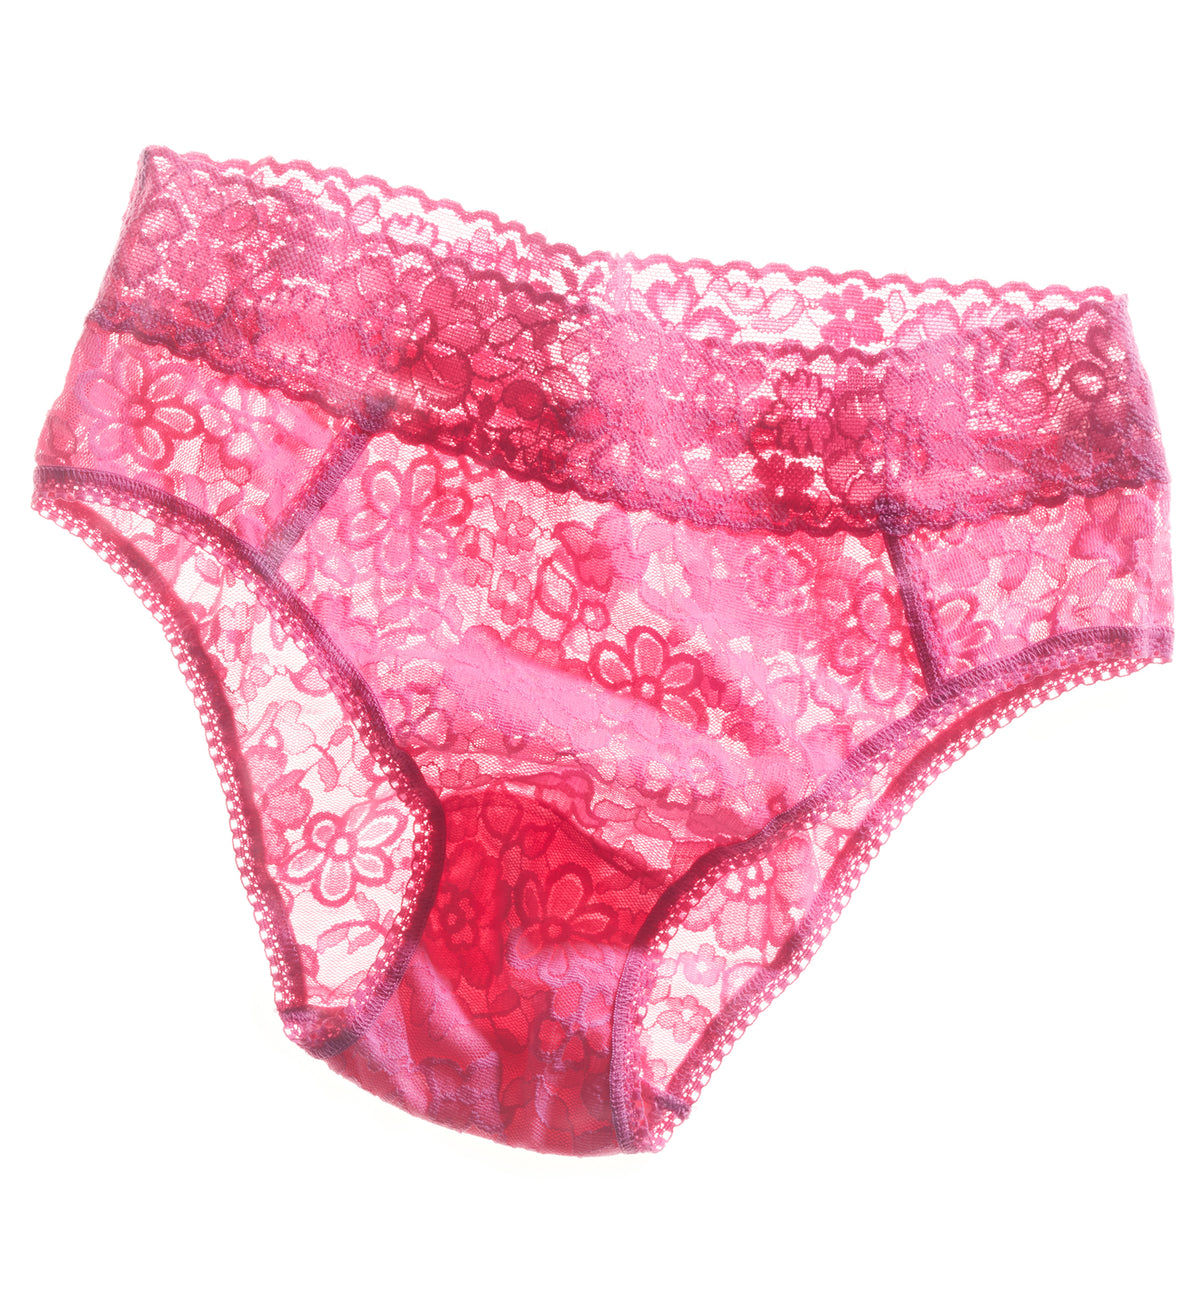 Hanky Panky Daily Lace Girl Brief (772441),XS,Dream House Pink - Dream House Pink,XS